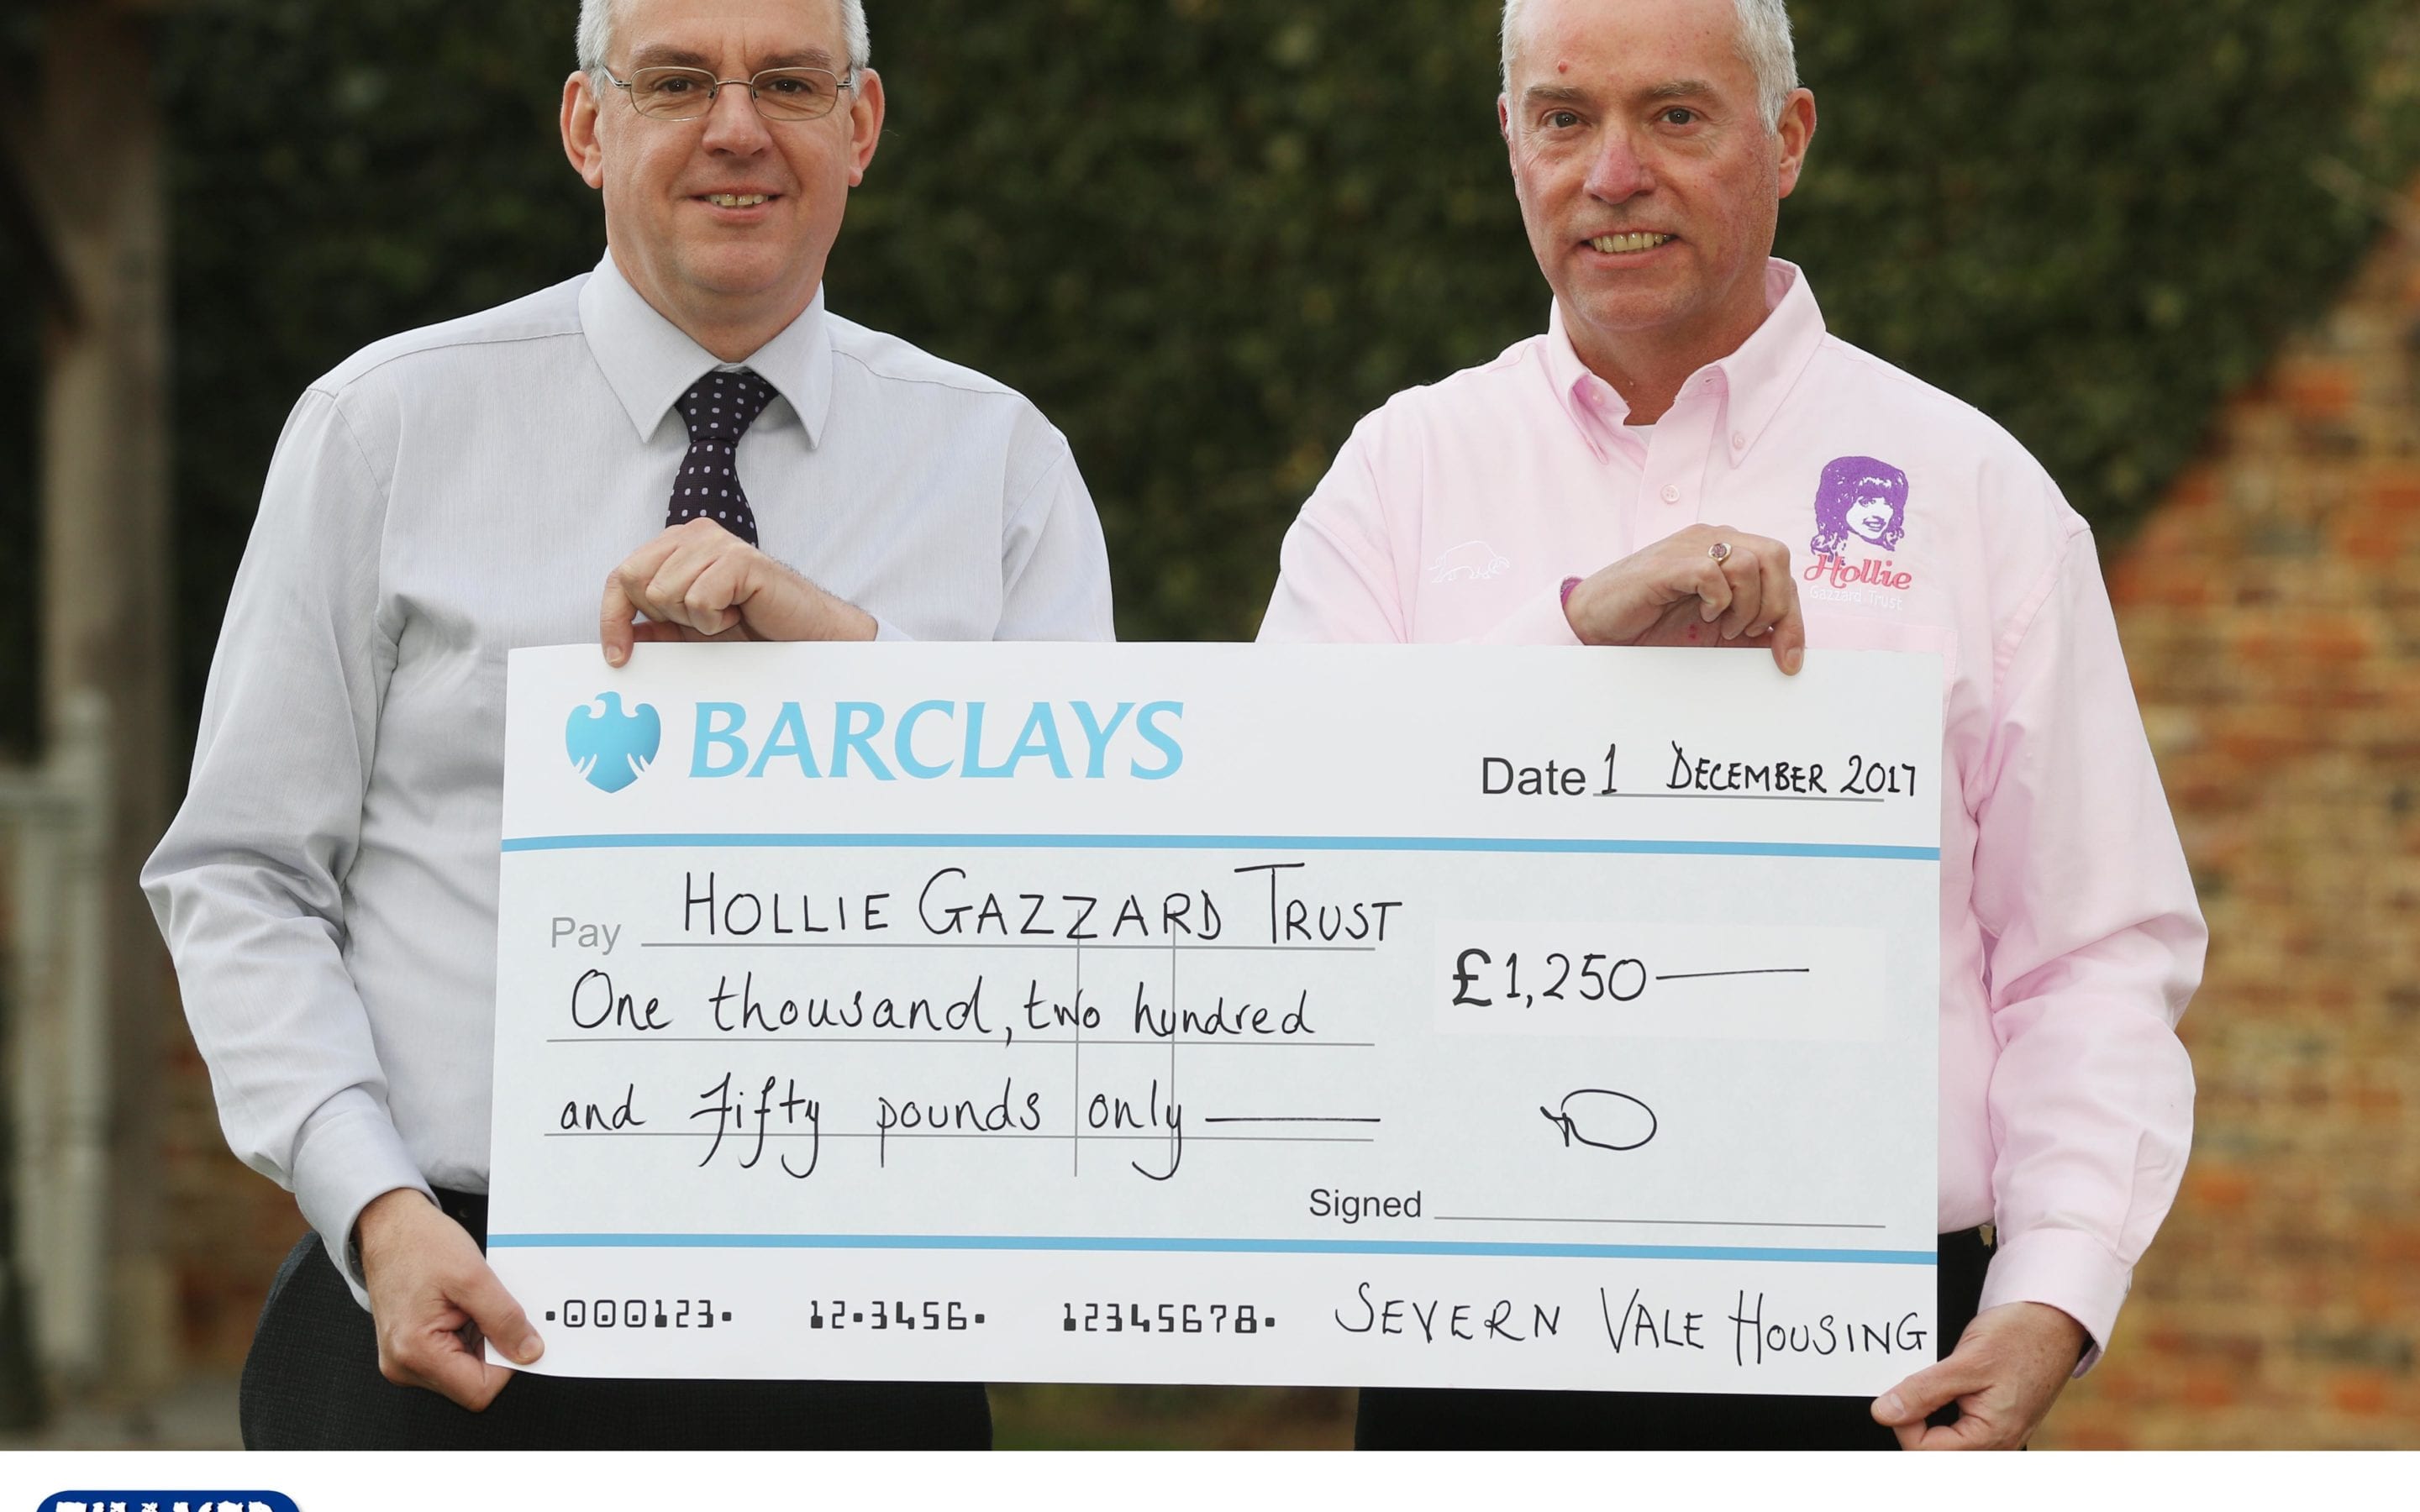 Severn Vale Housing present Nick Gazzard with a cheque